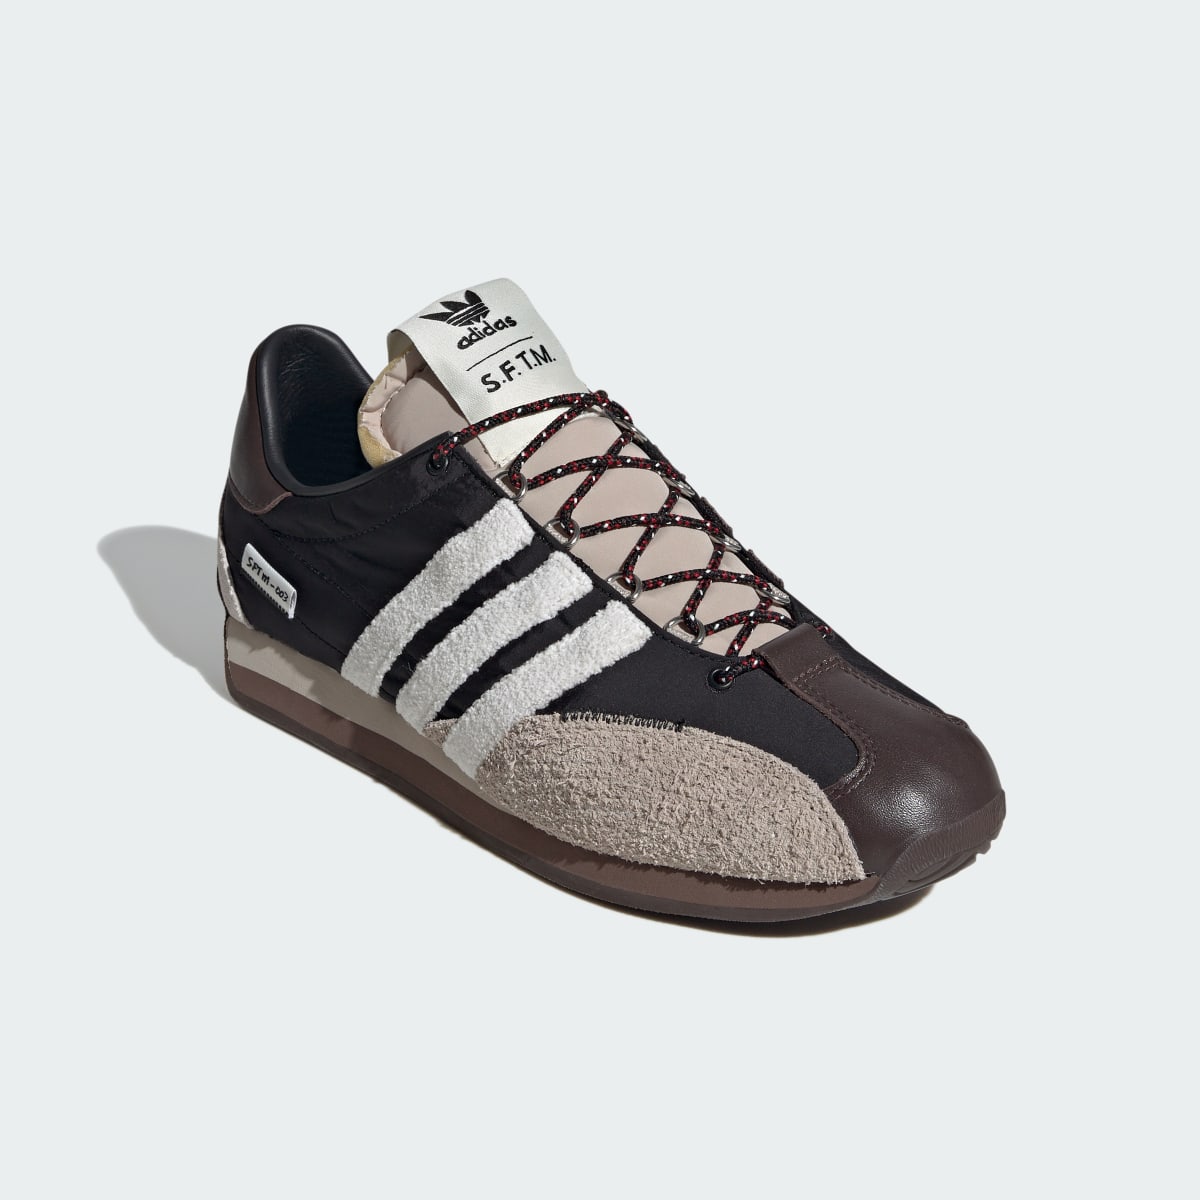 Adidas SFTM Country OG Low Trainers. 6